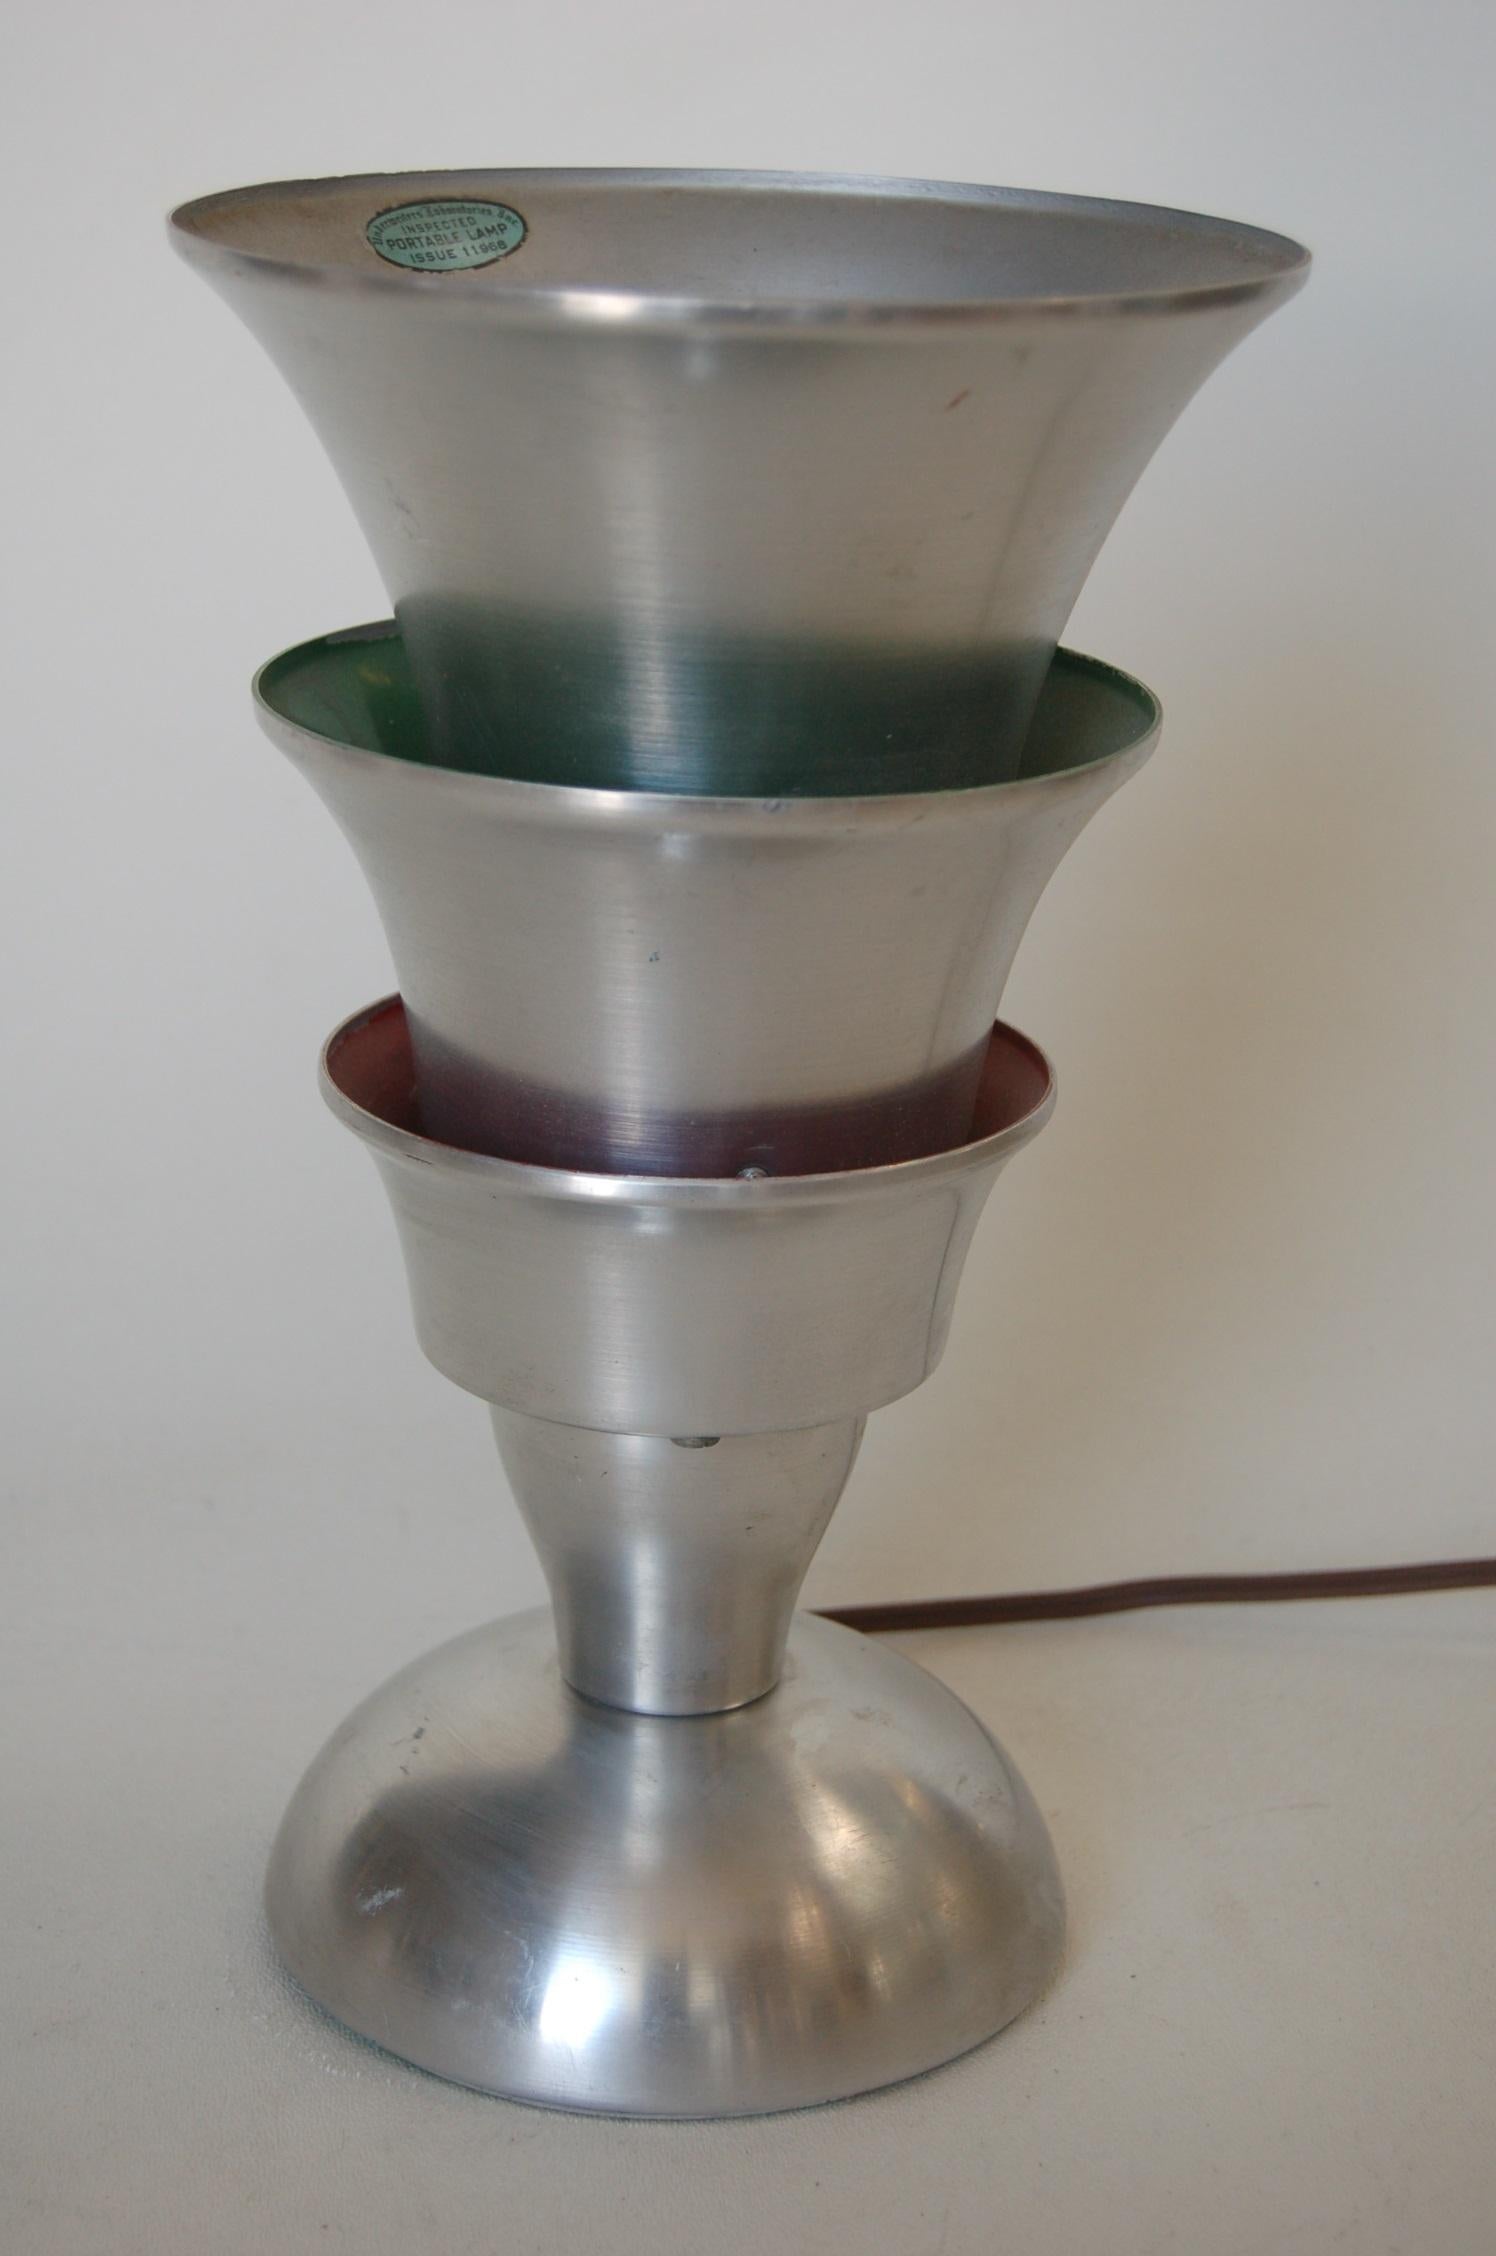 Art Deco style brushed aluminum red and green industrial accent flood table lamp. Underwriters laboratory. Measures 6